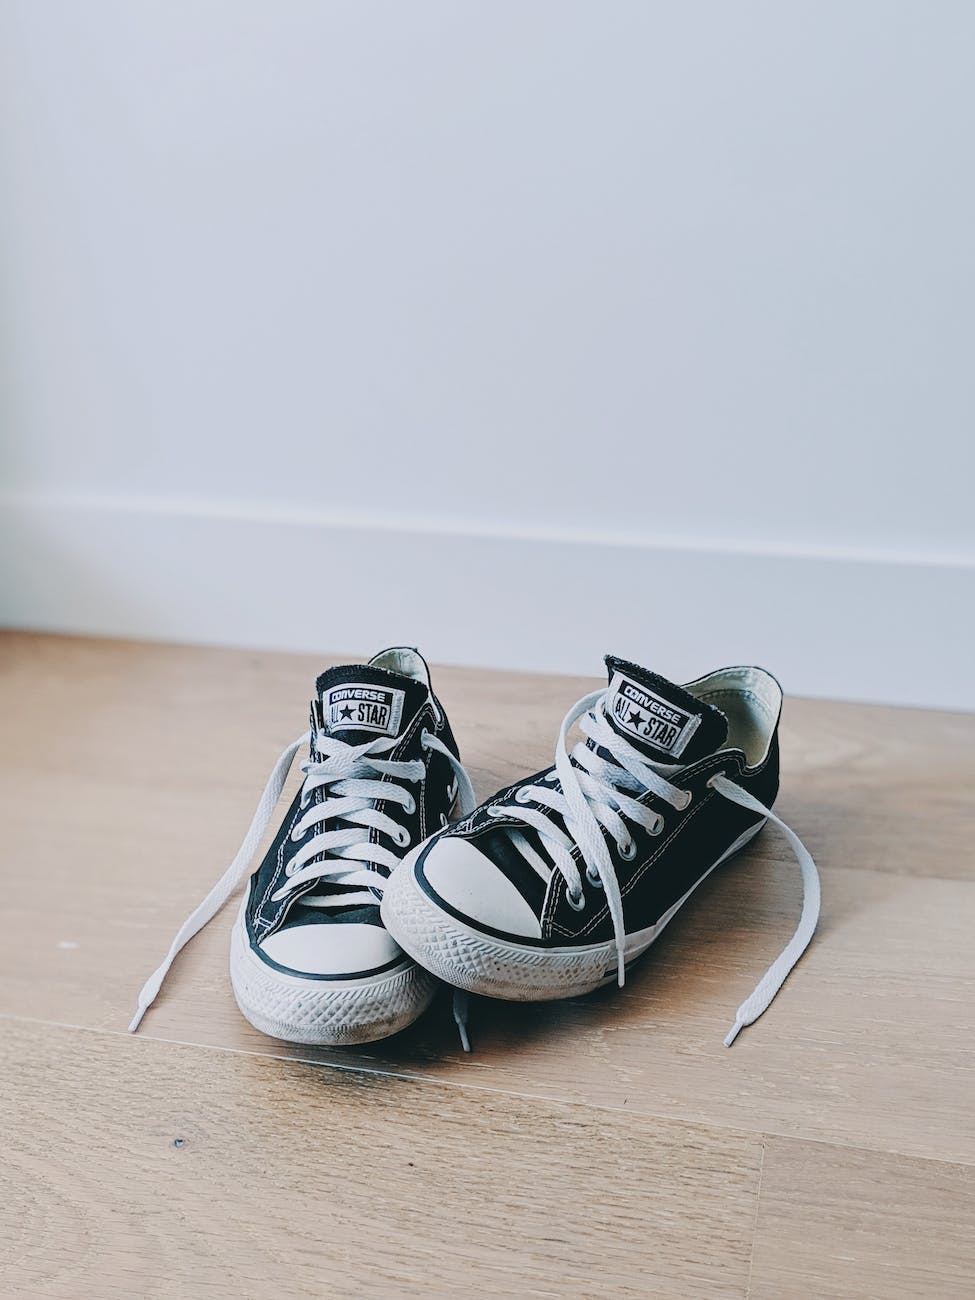 How to Clean Your Converse at Home - Wear Next.